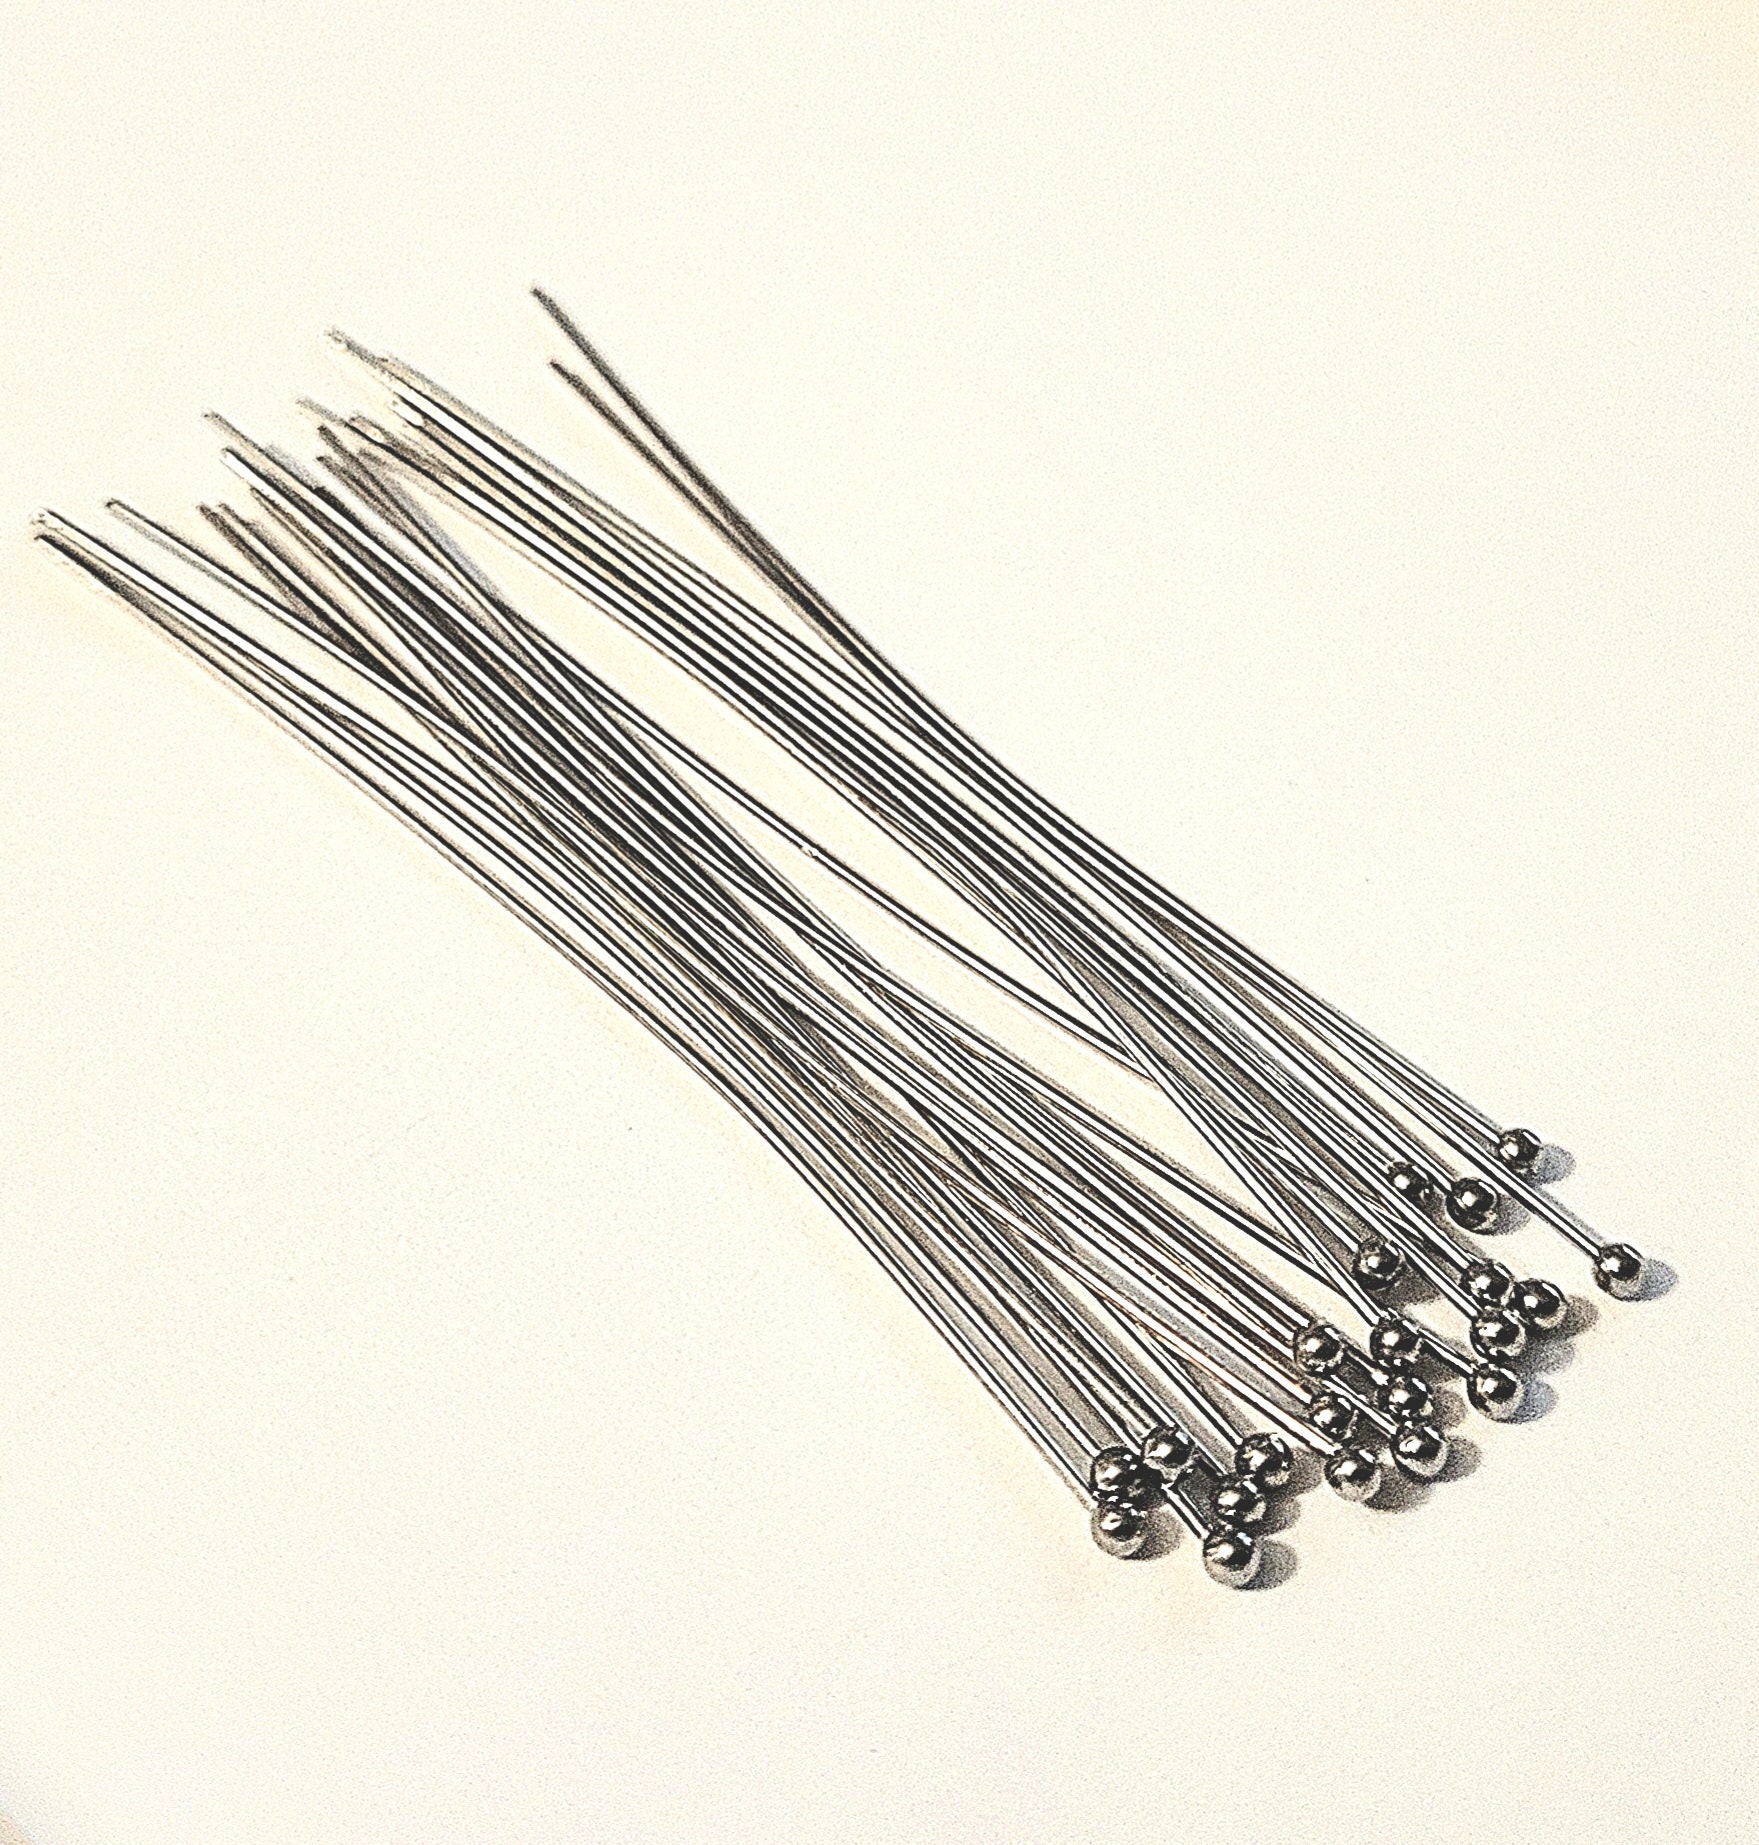 50mm Jewelry Pins, Flat Head, Ball Head and Eye Pins, Stainless